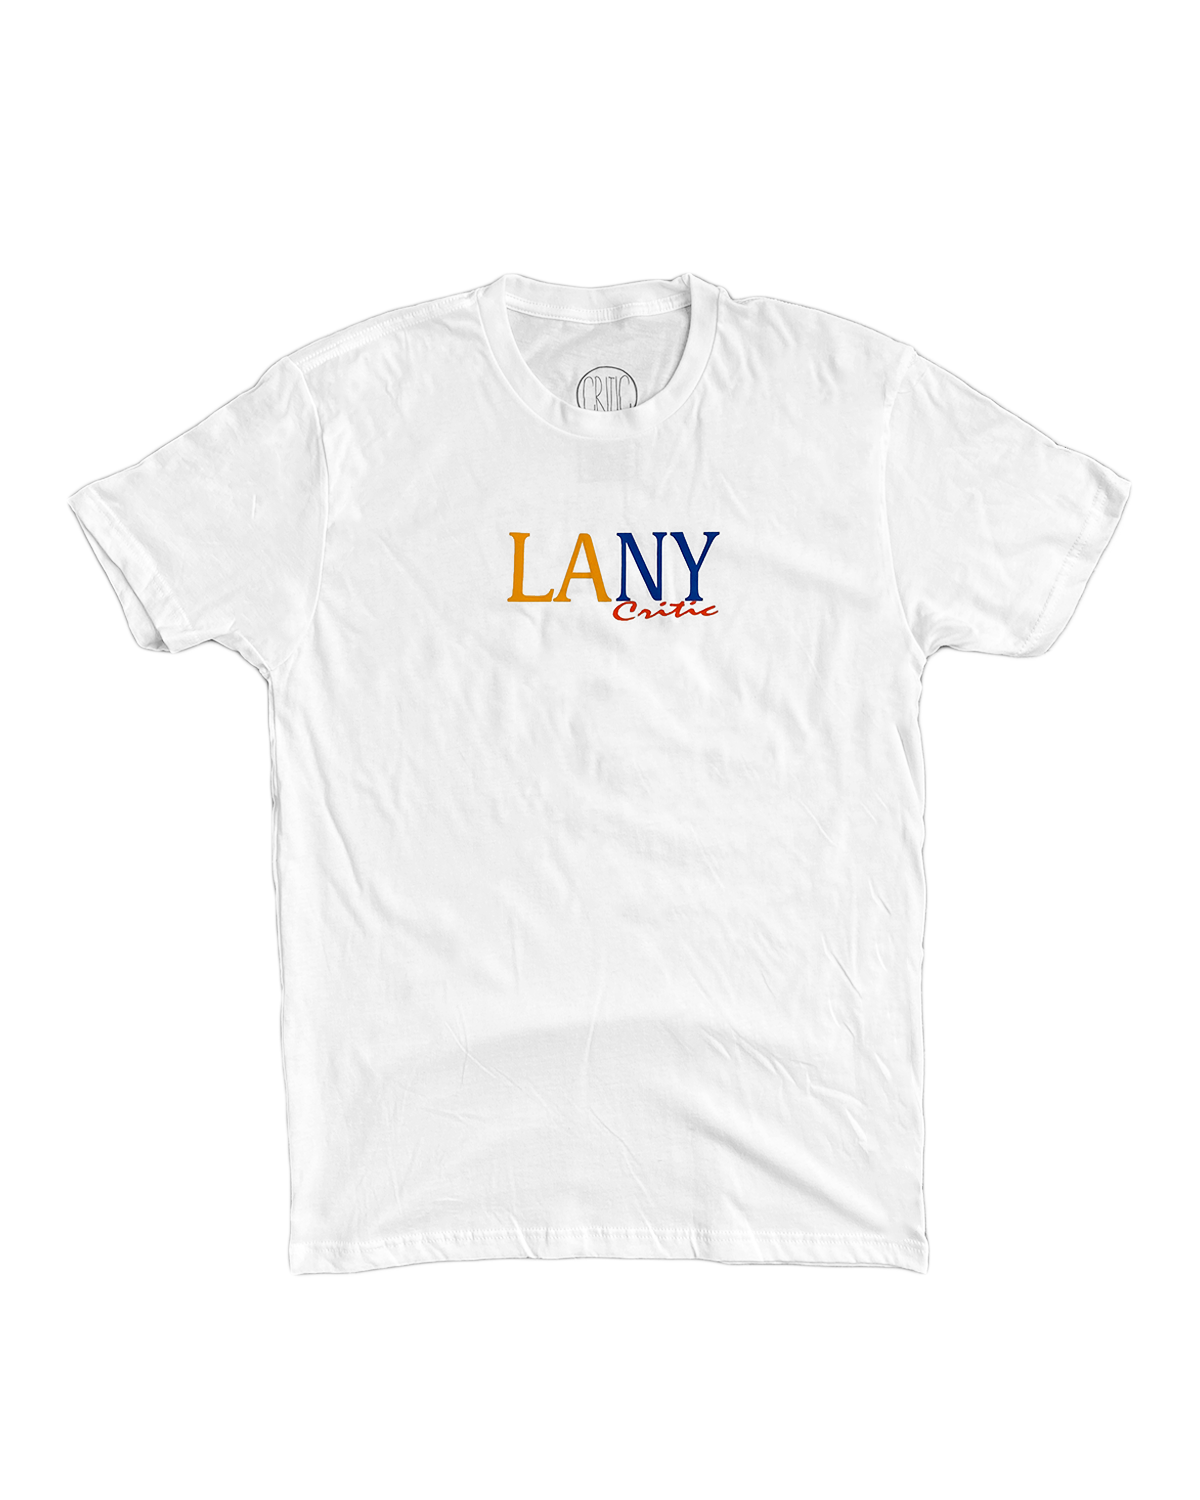 LANY tee in White